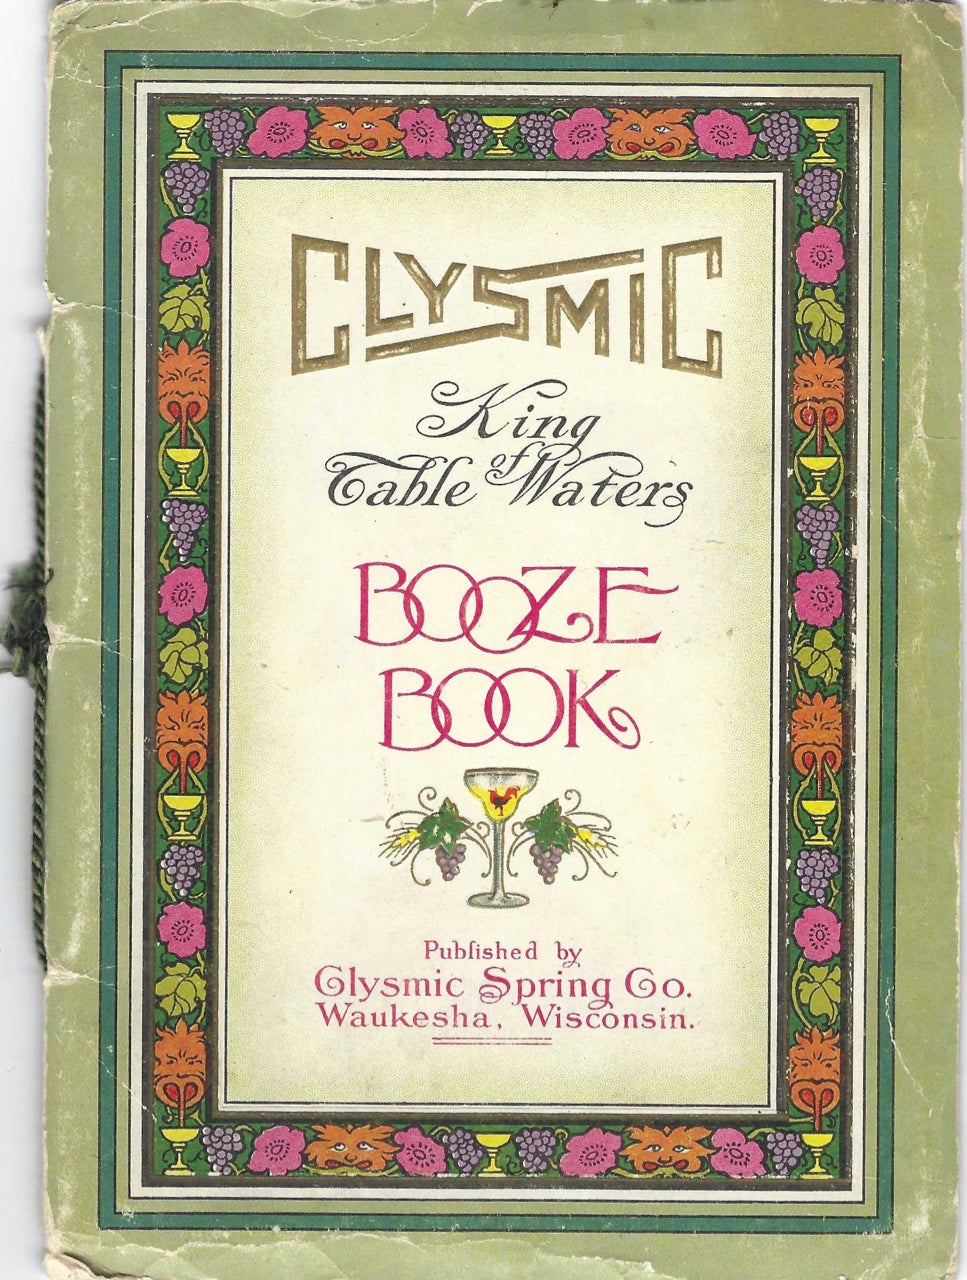 Item #7951 Clysmic King of Table Waters, Booze Book. Clysmic Spring Company, Wisconsin Waukesha.